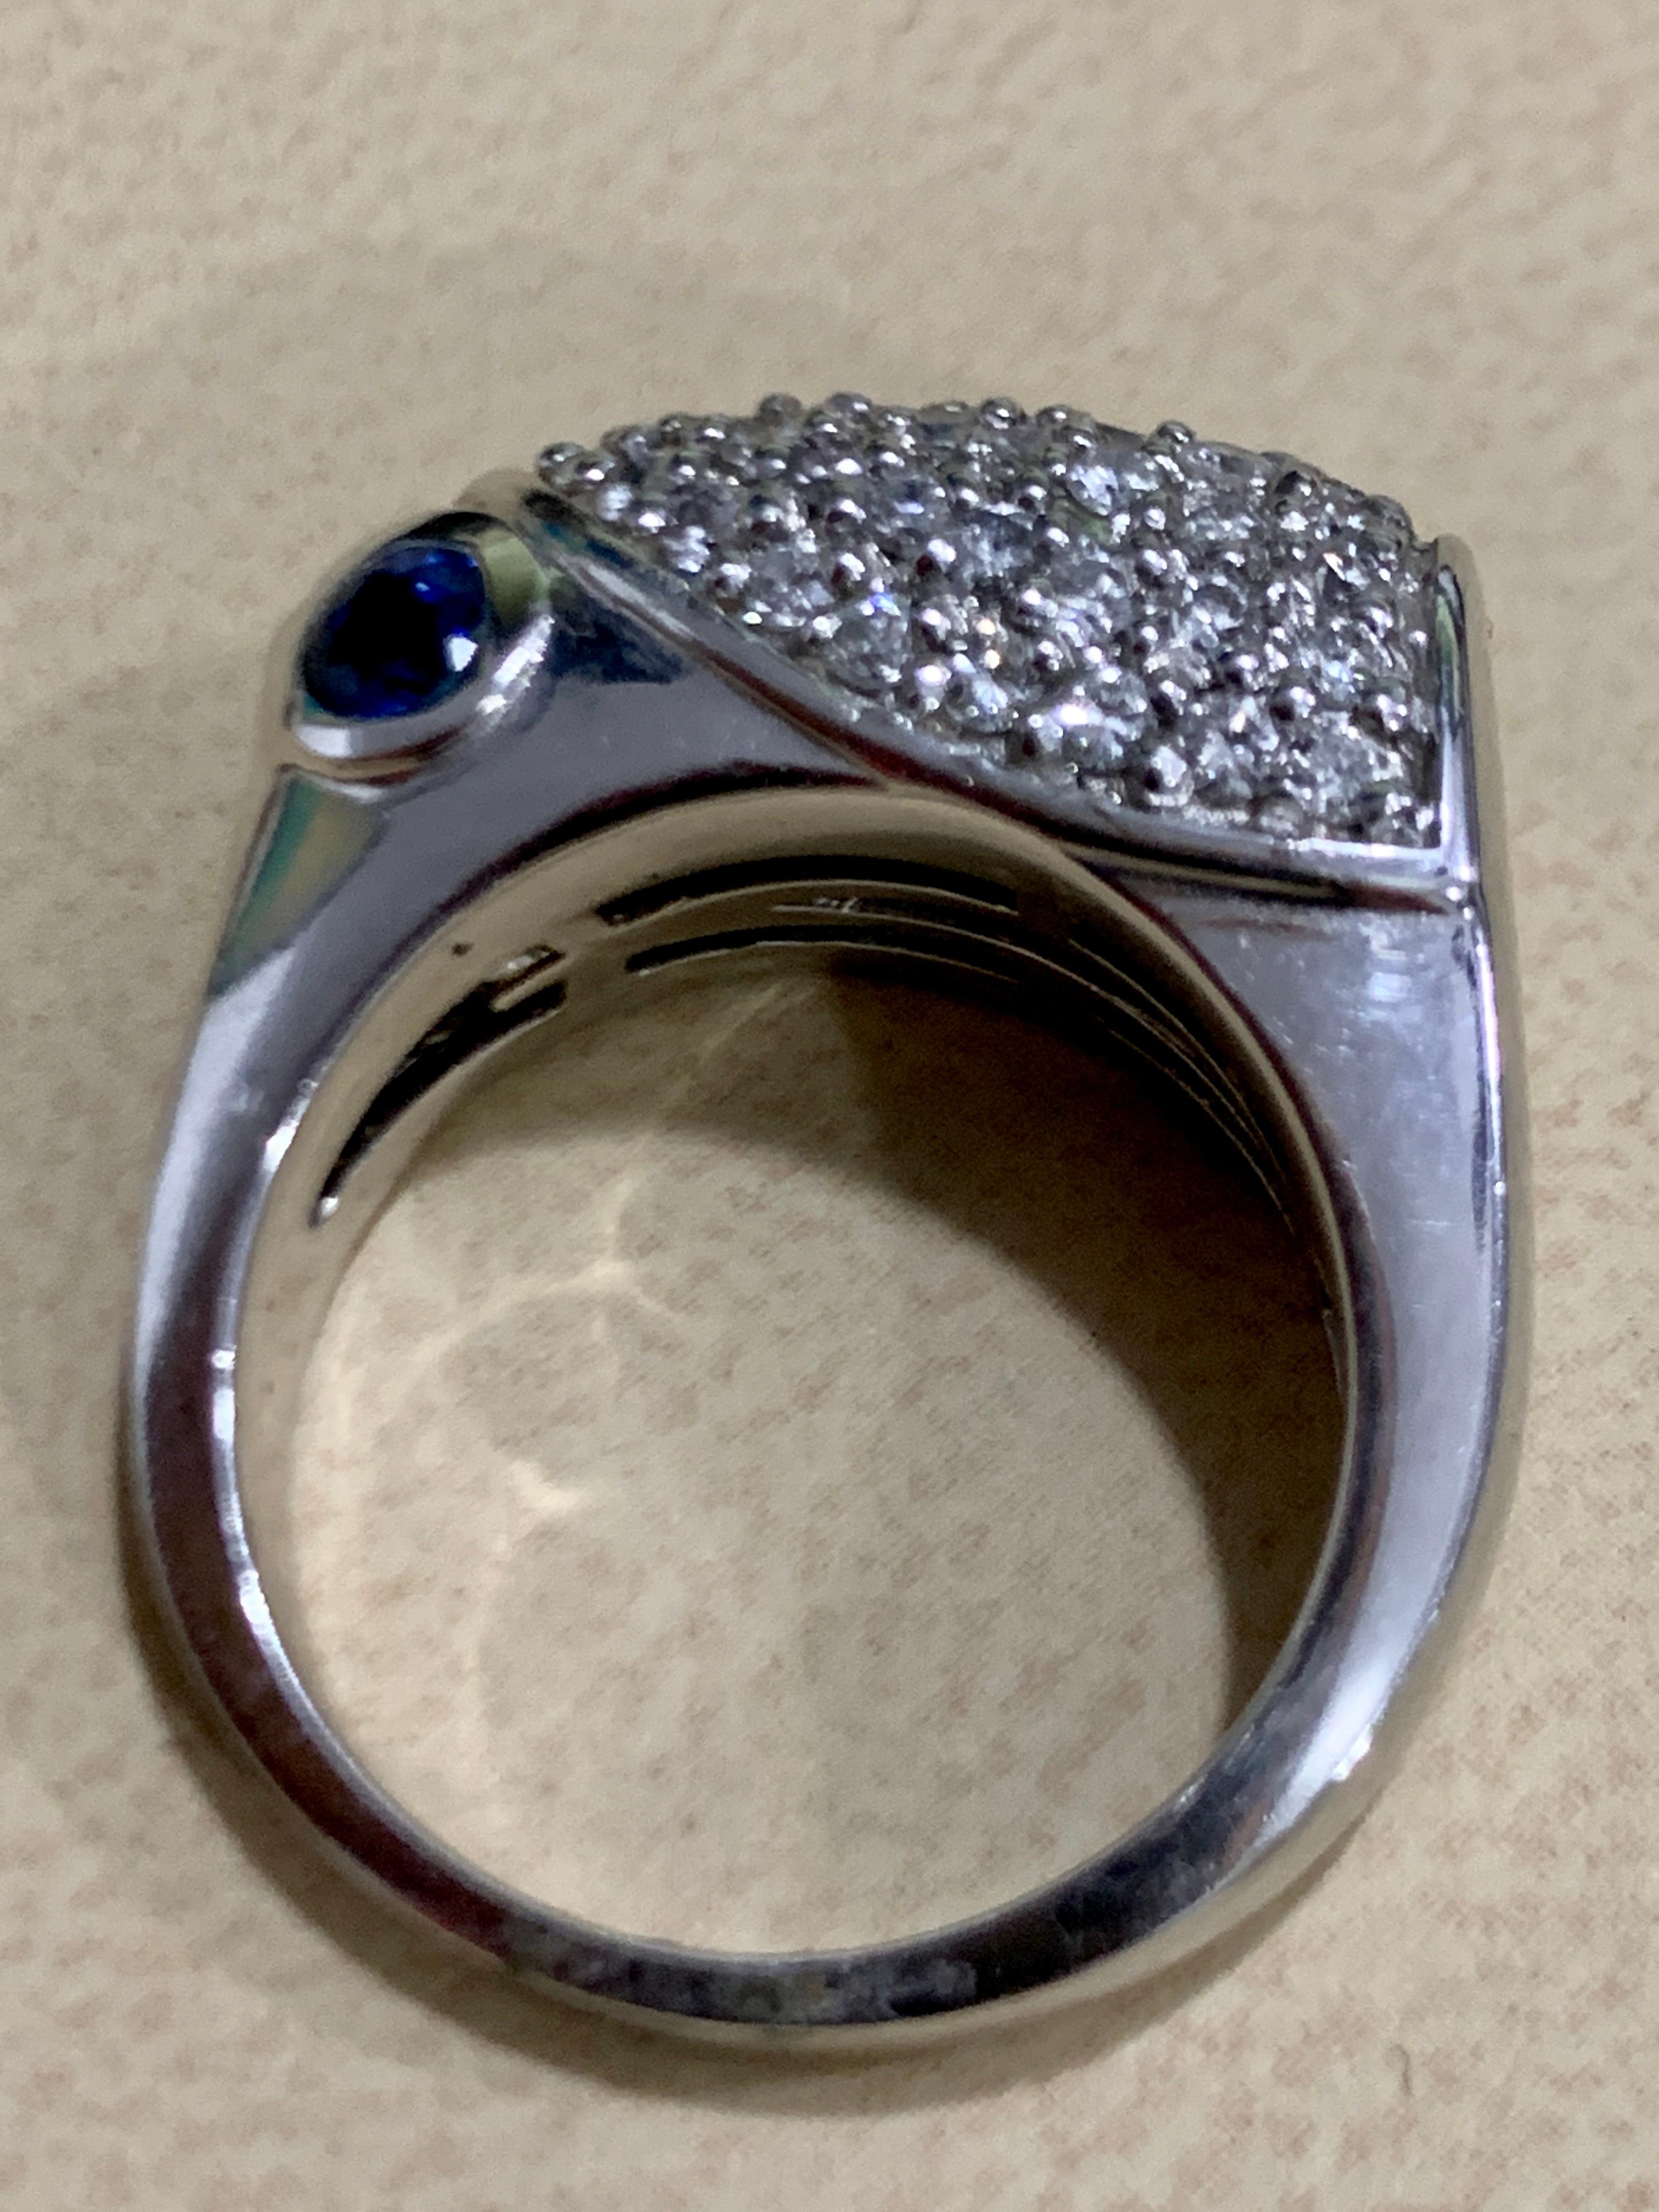 1.25 Carat Diamond Animal Cocktail Ring with Sapphire Eyes in 14 Karat Gold In Excellent Condition For Sale In New York, NY